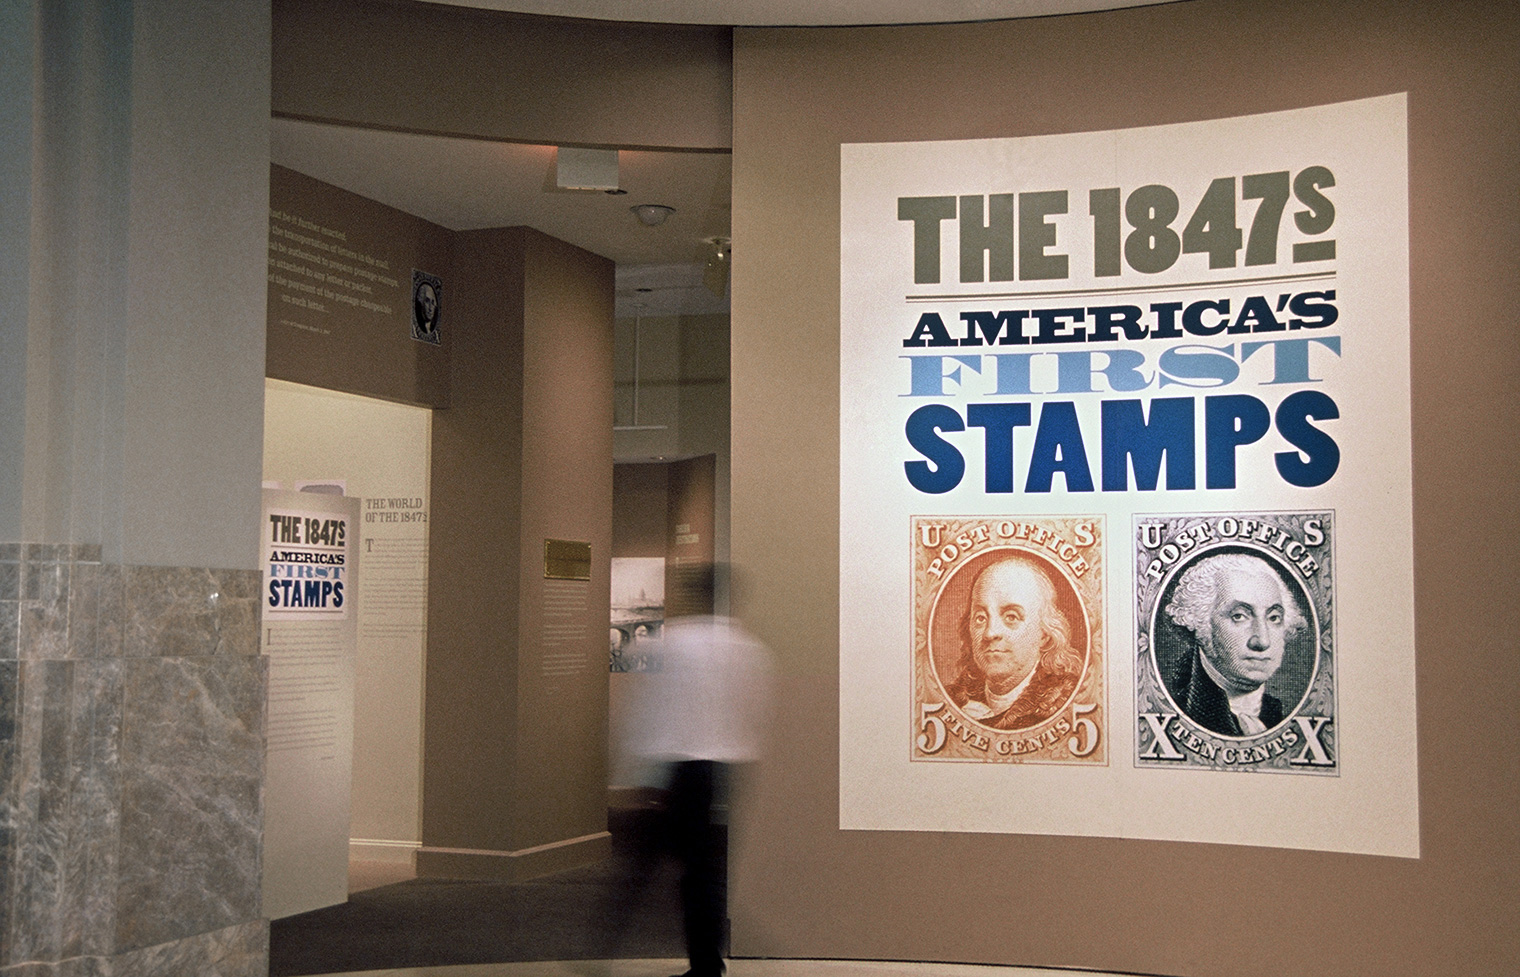 An exhibition presenting more than one hundred envelopes featuring the nation’s first two postage stamps.